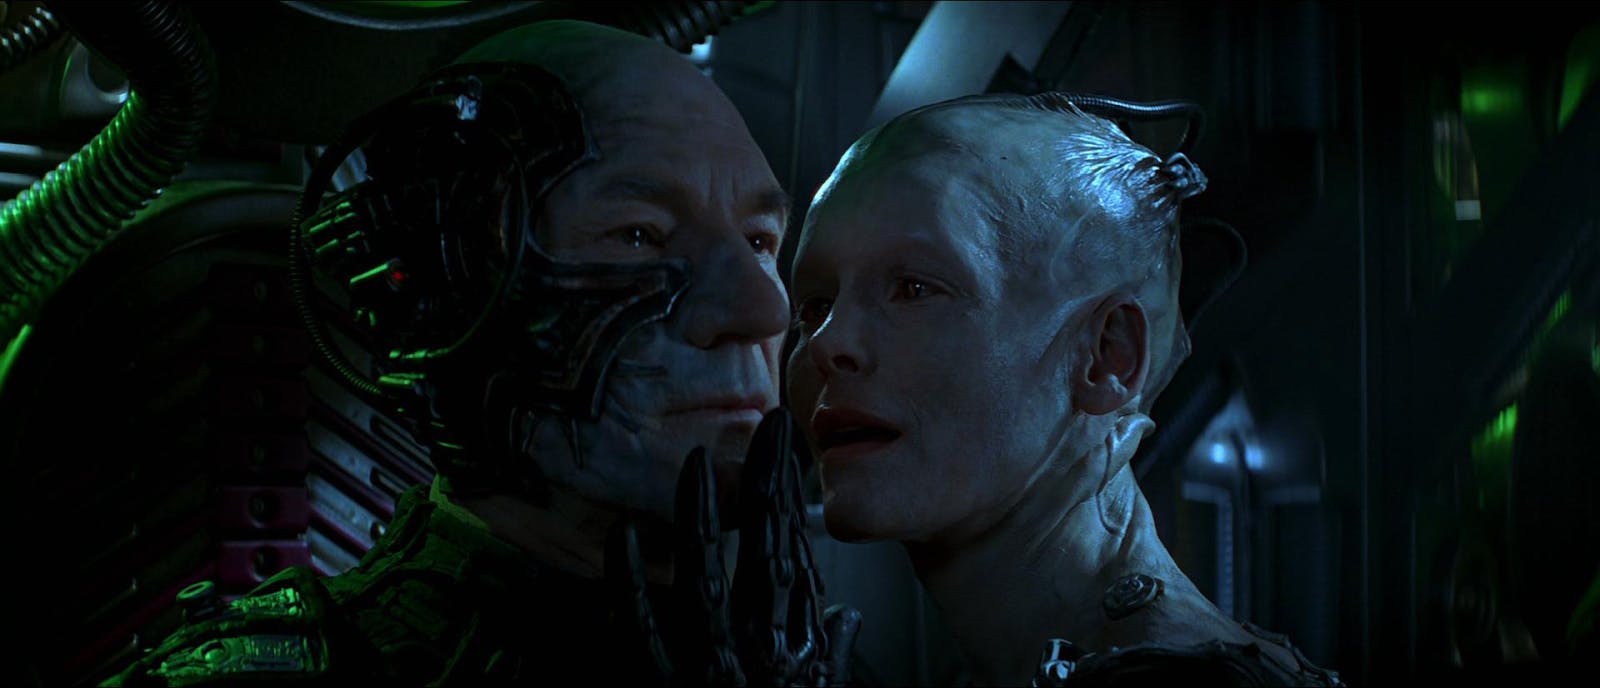 Picard as Locutus of Borg with tears in his eyes as the Borg Queen faces him with her hand touching his face in Star Trek First Contact